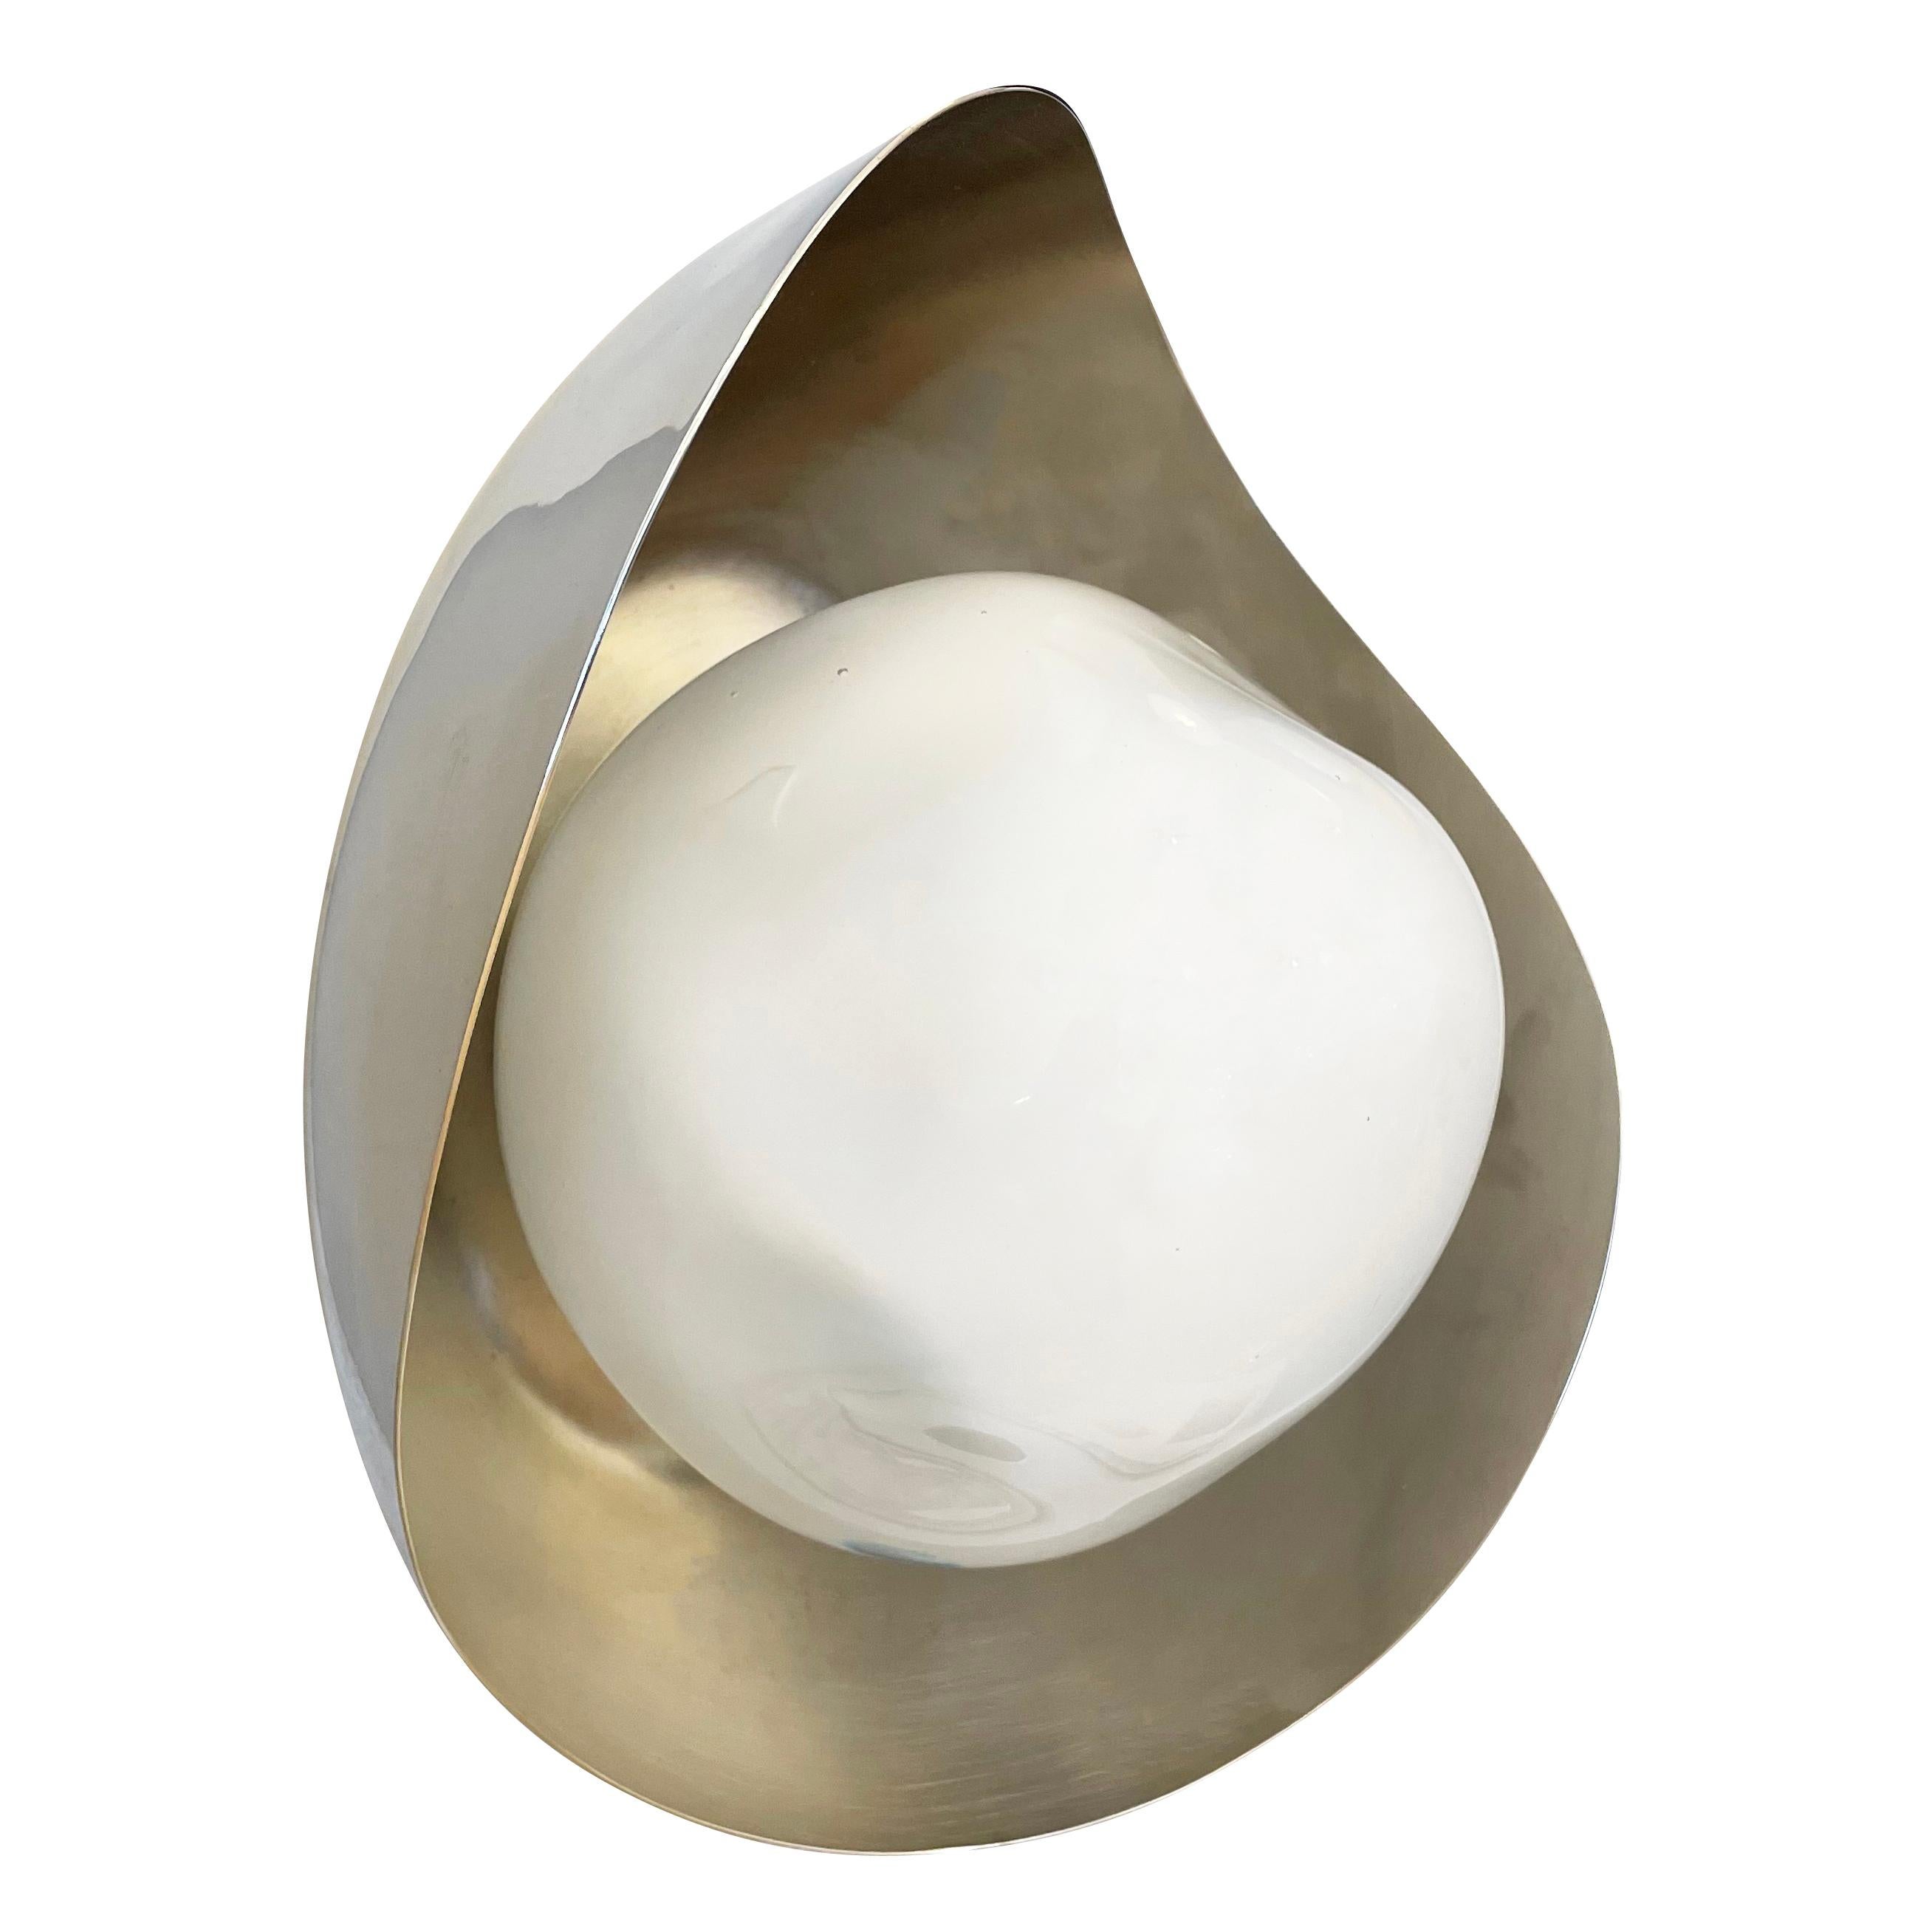 The Perla wall light features an organic brass shell nestling our sfera glass handblown in Tuscany. Shown in a two-tone finish with a polished nickel exterior and satin nickel interior. Can also be installed as a flush mount ceiling